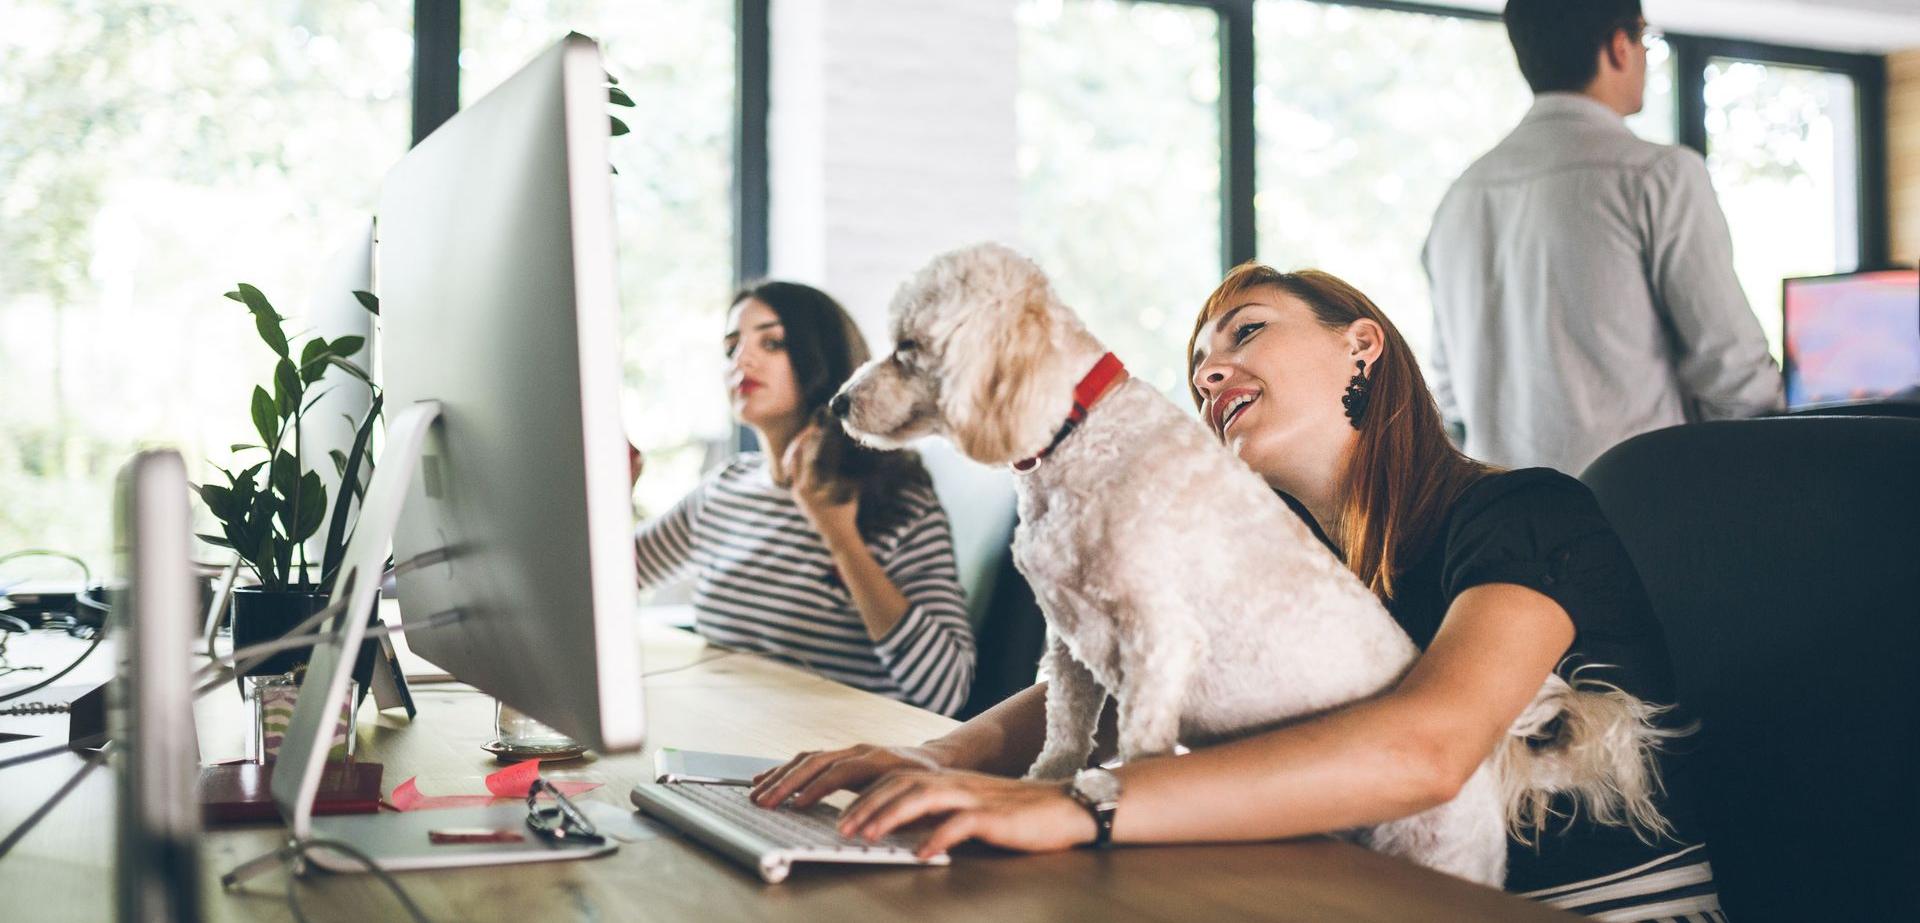 Live Light | Woman with a dog on her lap as she shares her screen with coworkers while at her office